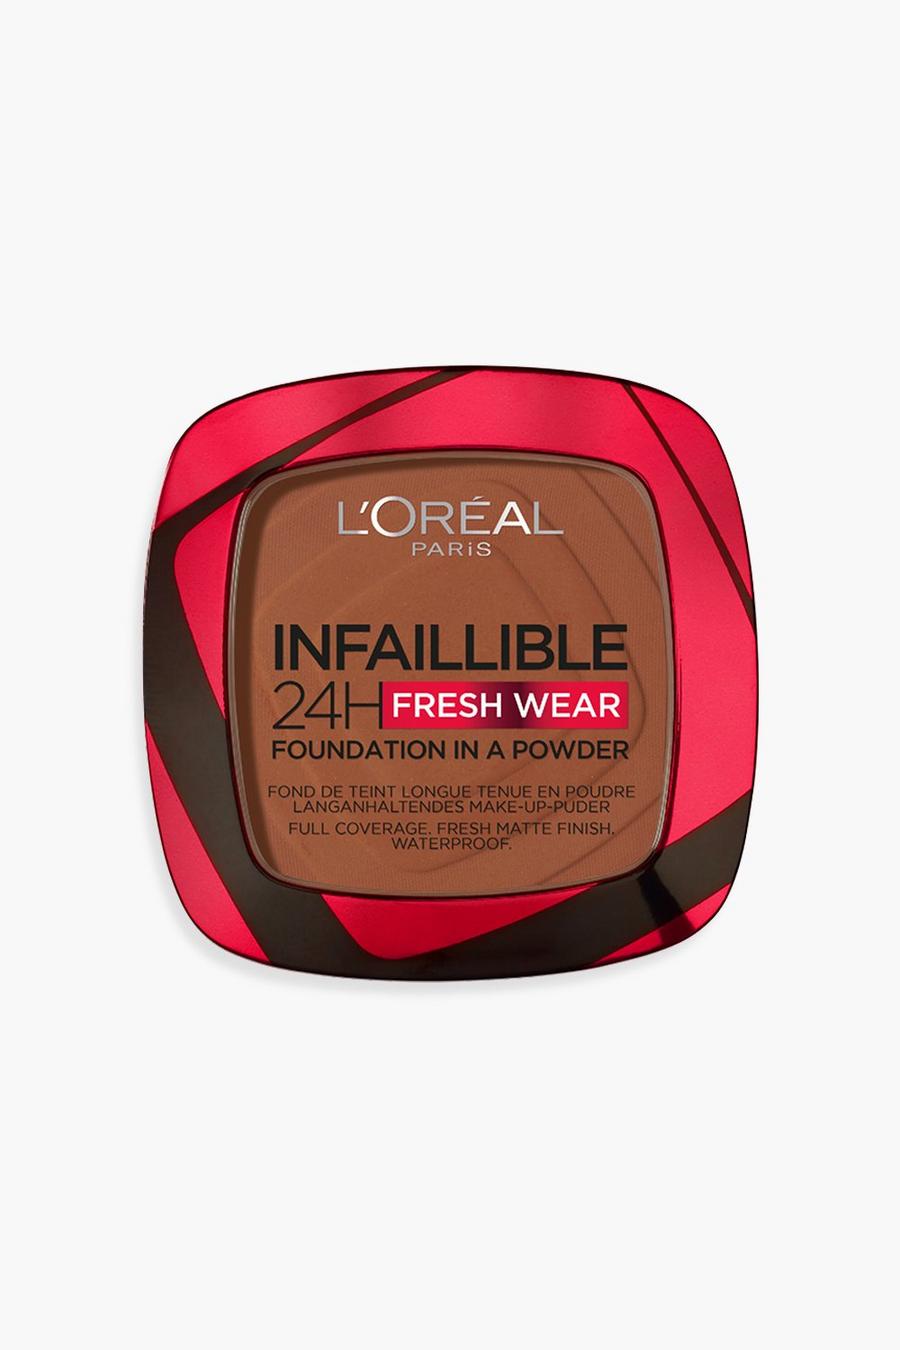 Amber Loreal Paris Infallible Puderfoundation - 375 image number 1